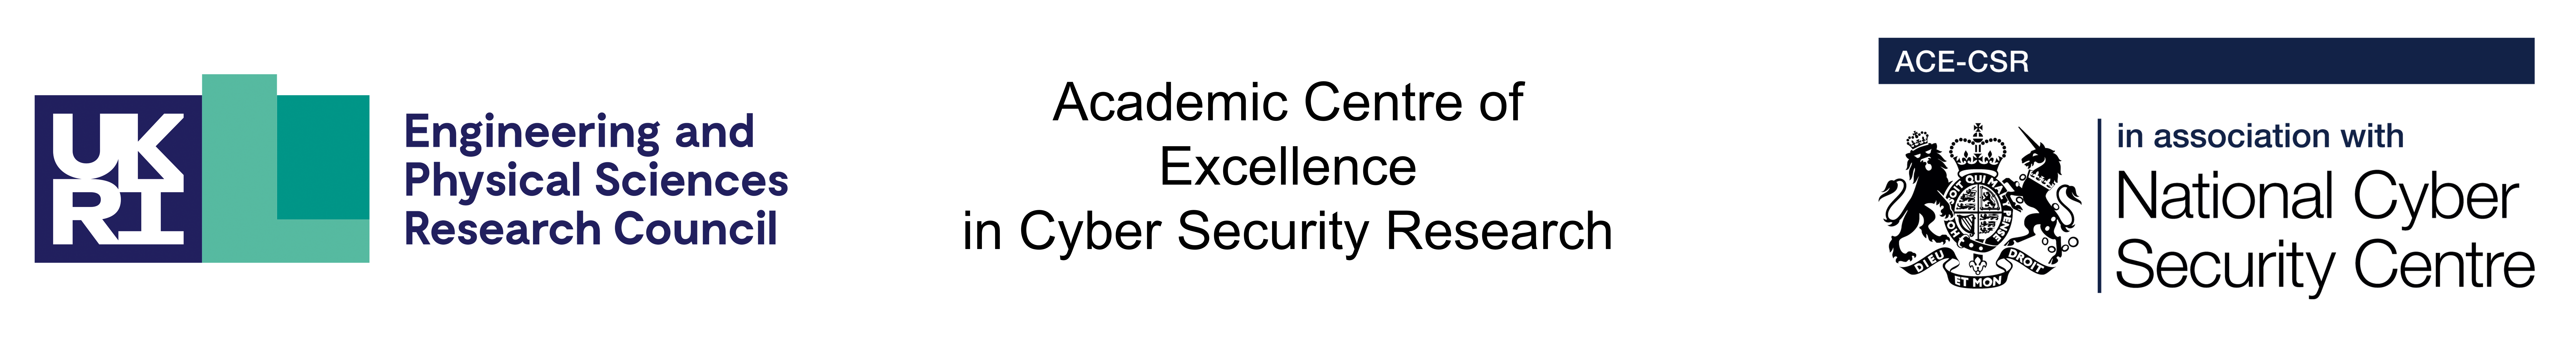 Academic Centre of Excellence in Cyber Security Research logo